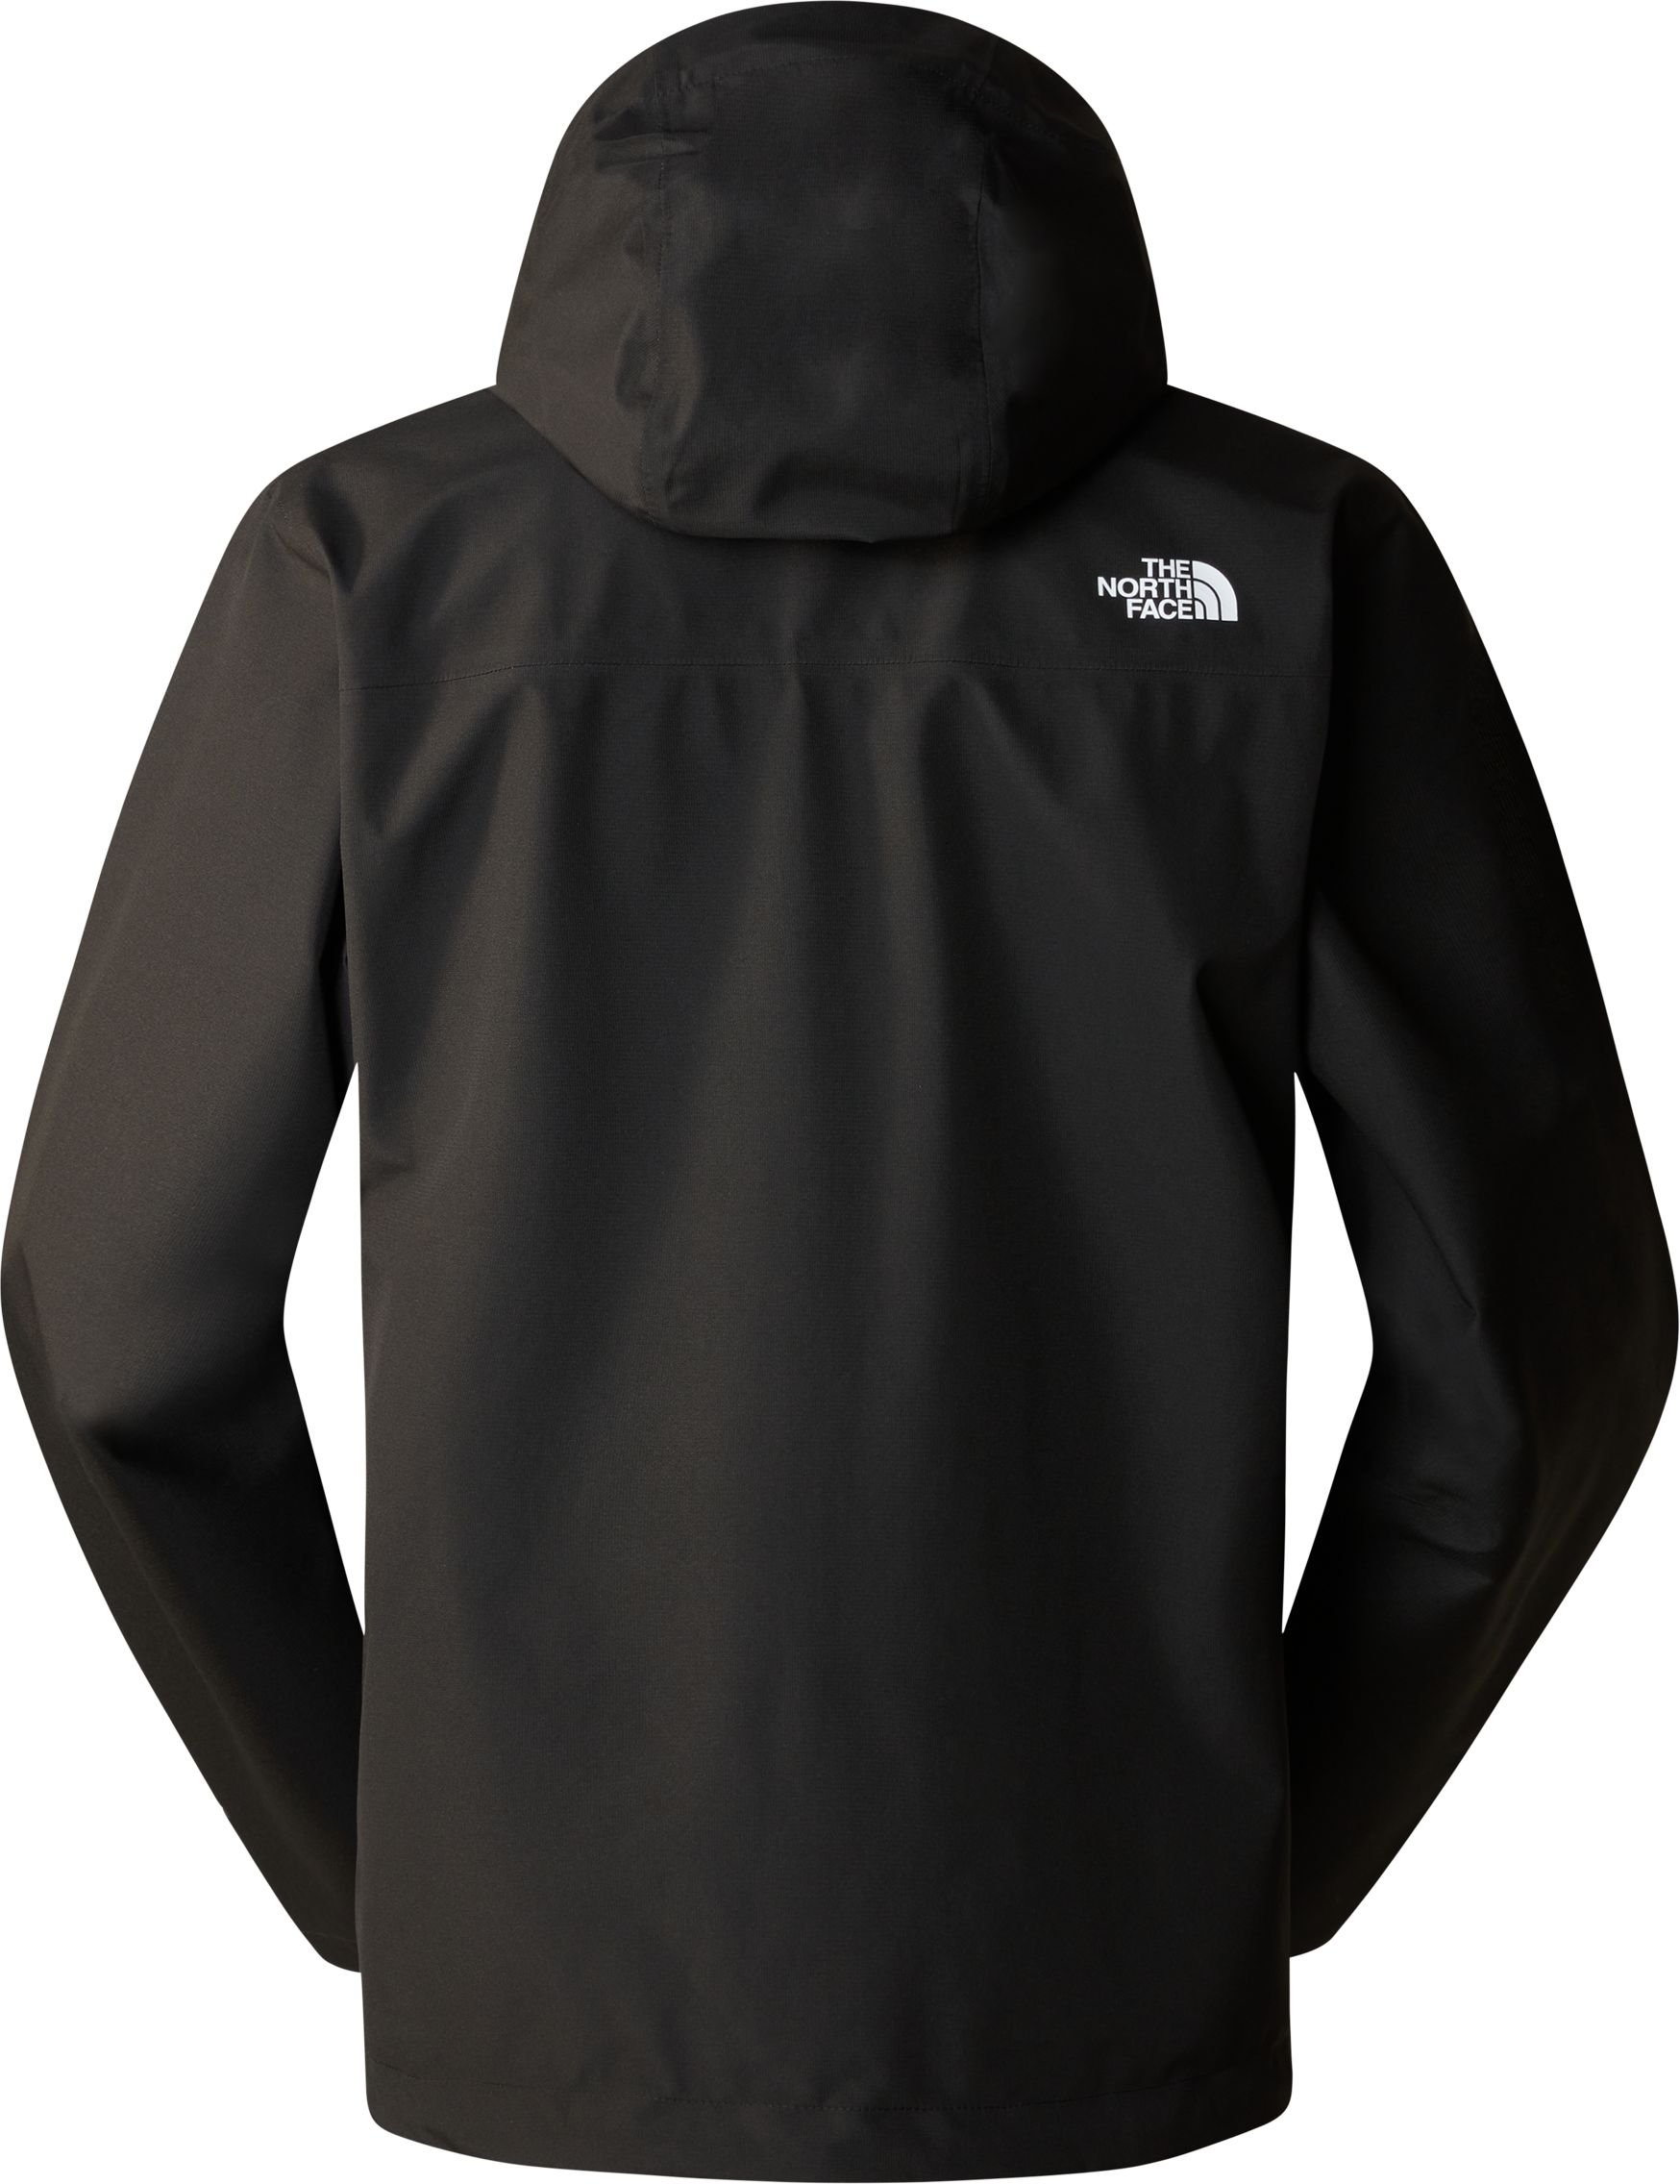 THE NORTH FACE, M WHITON 3L JACKET